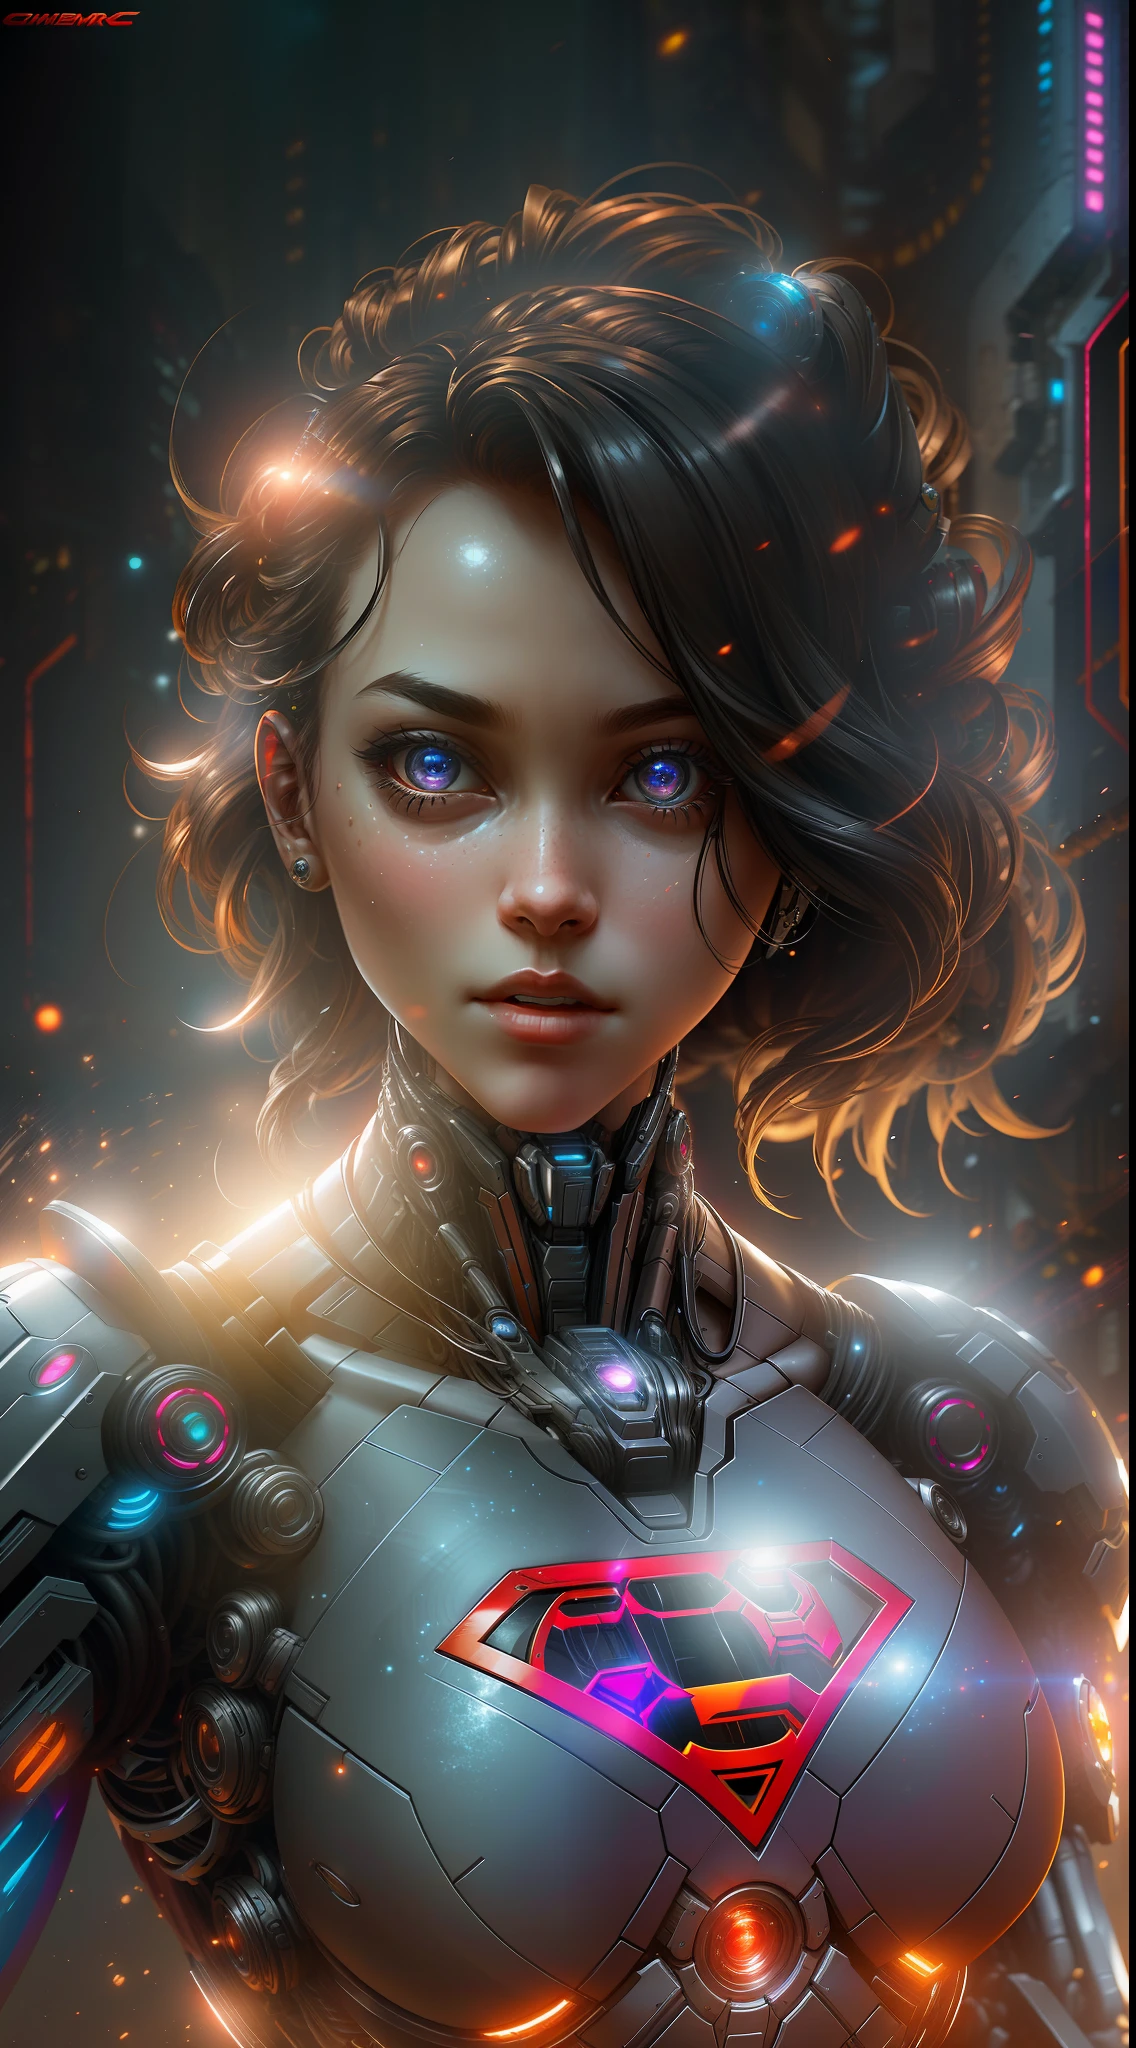 Supergirl from DC photography, biomechanical, complex robot, full growth, hyper-realistic, insane small details, extremely clean lines, cyberpunk aesthetic, masterpiece featured on Zbrush Central